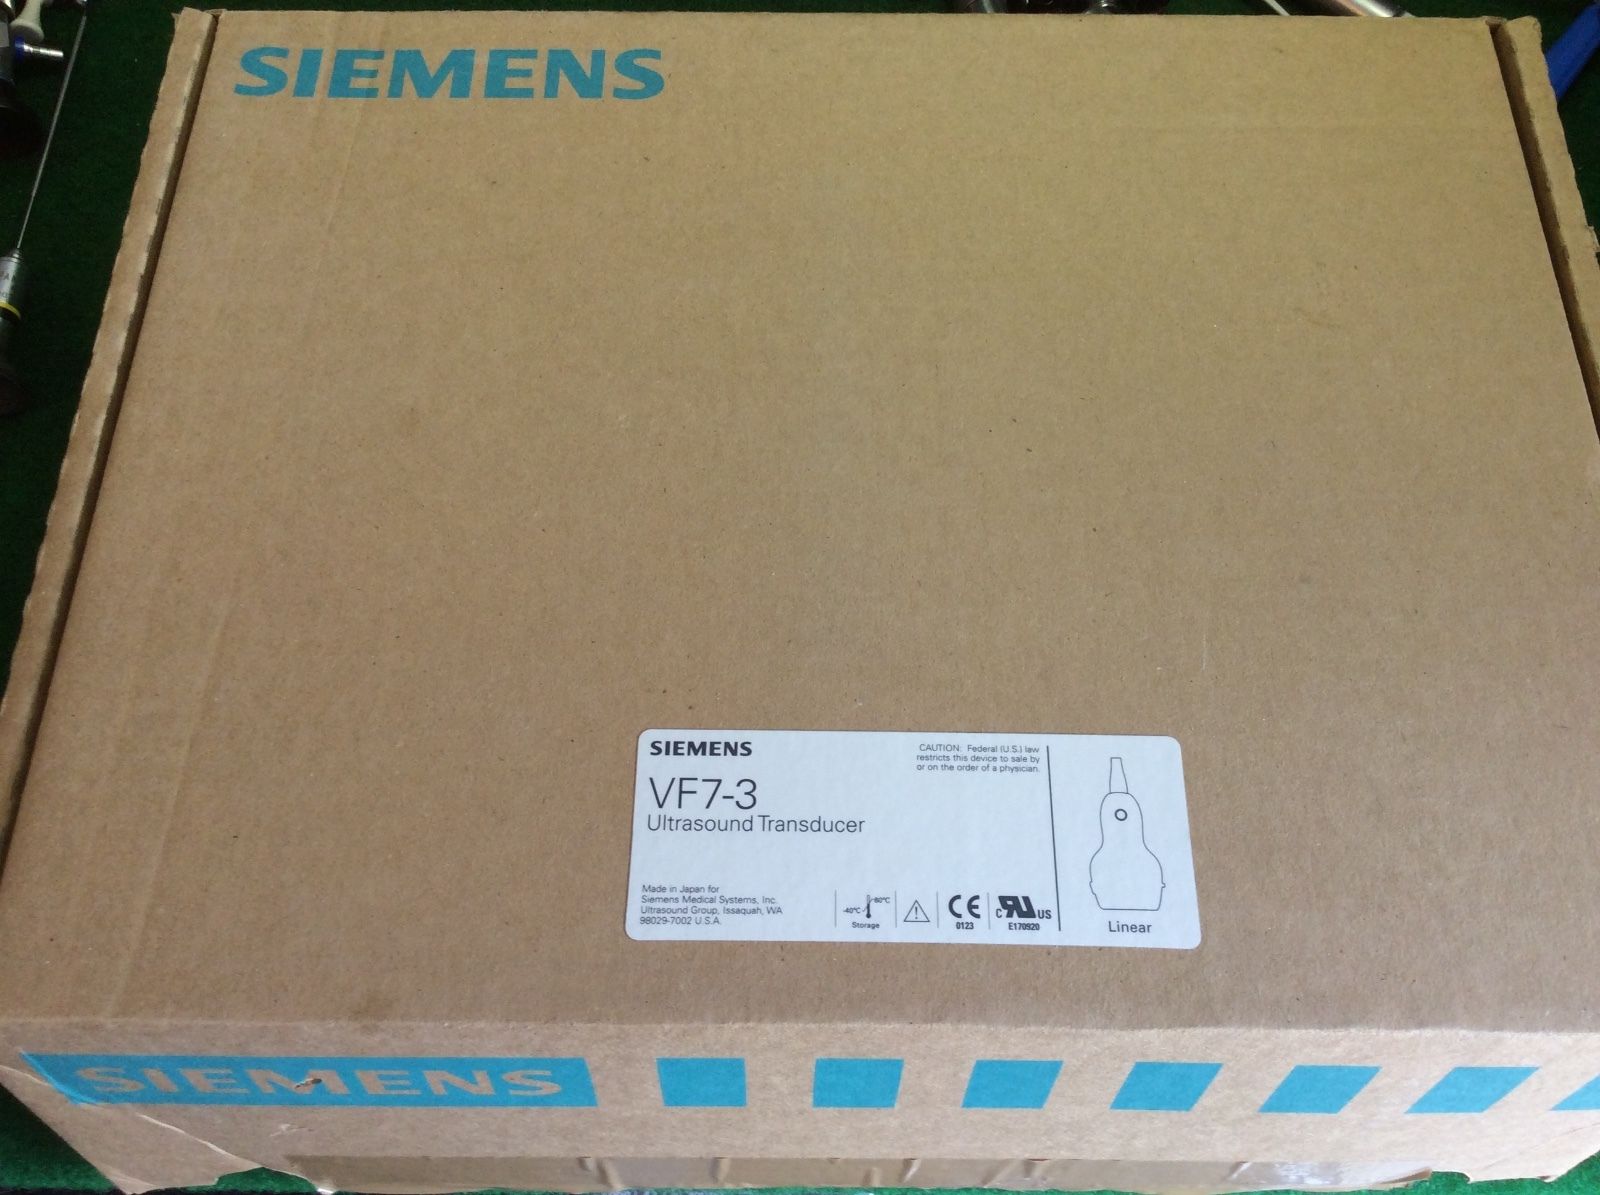 Siemens Antares VF7-3 DL-4 Ultrasound Transducer Probe - 2D Linear 3-7Mhz NEW DIAGNOSTIC ULTRASOUND MACHINES FOR SALE